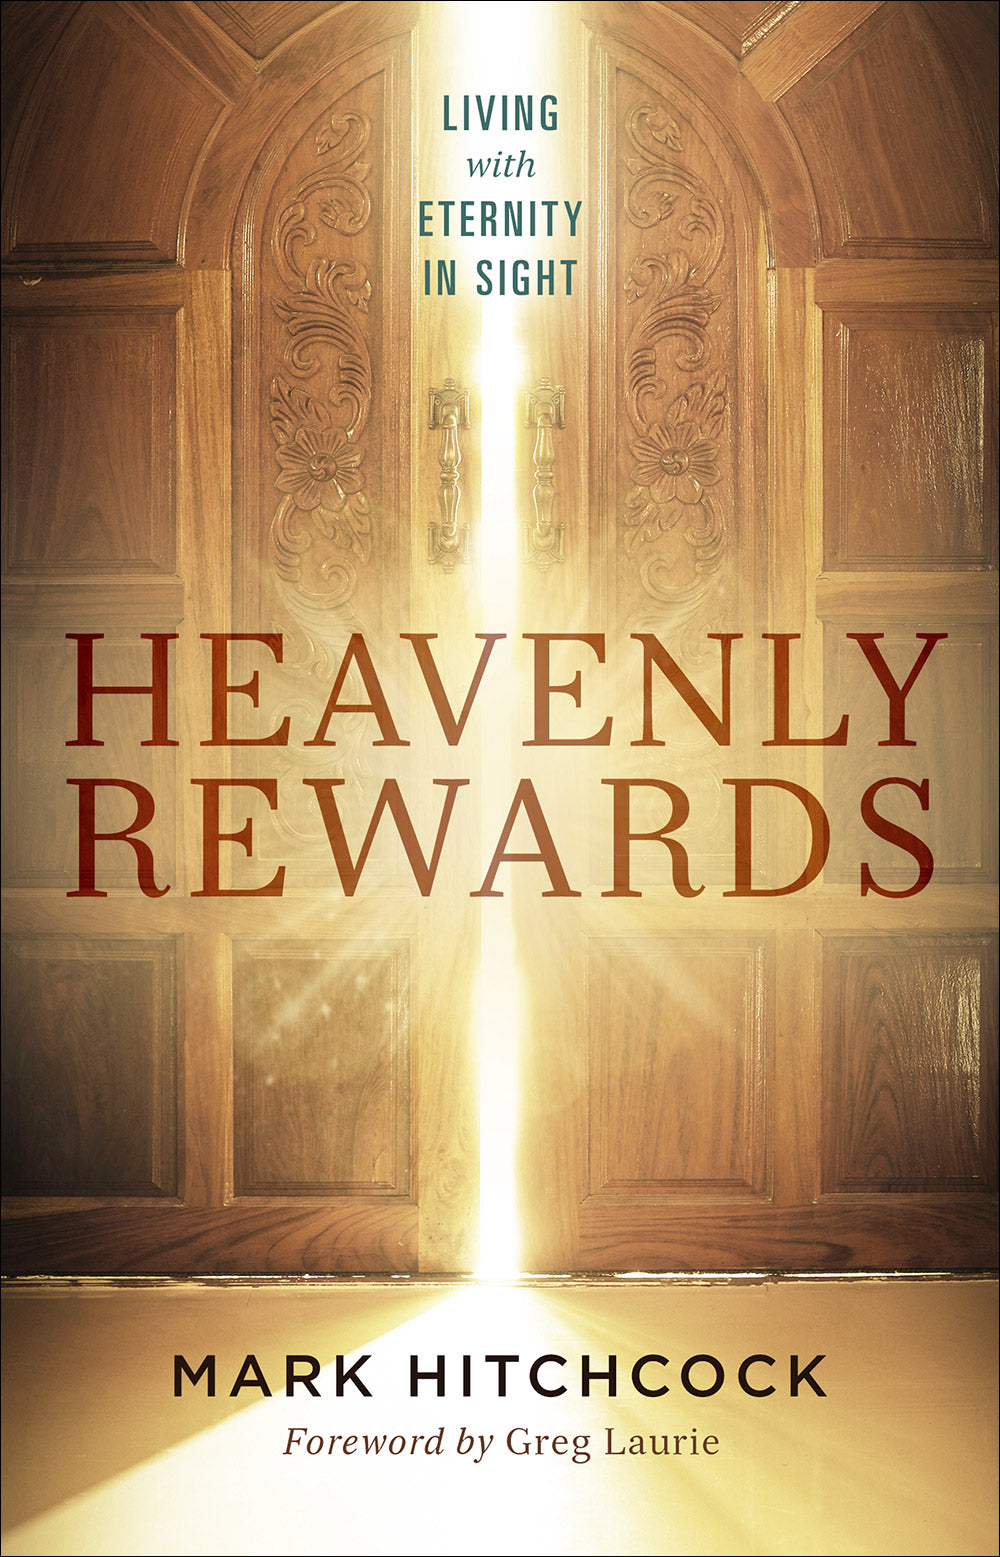 Image of Heavenly Rewards other